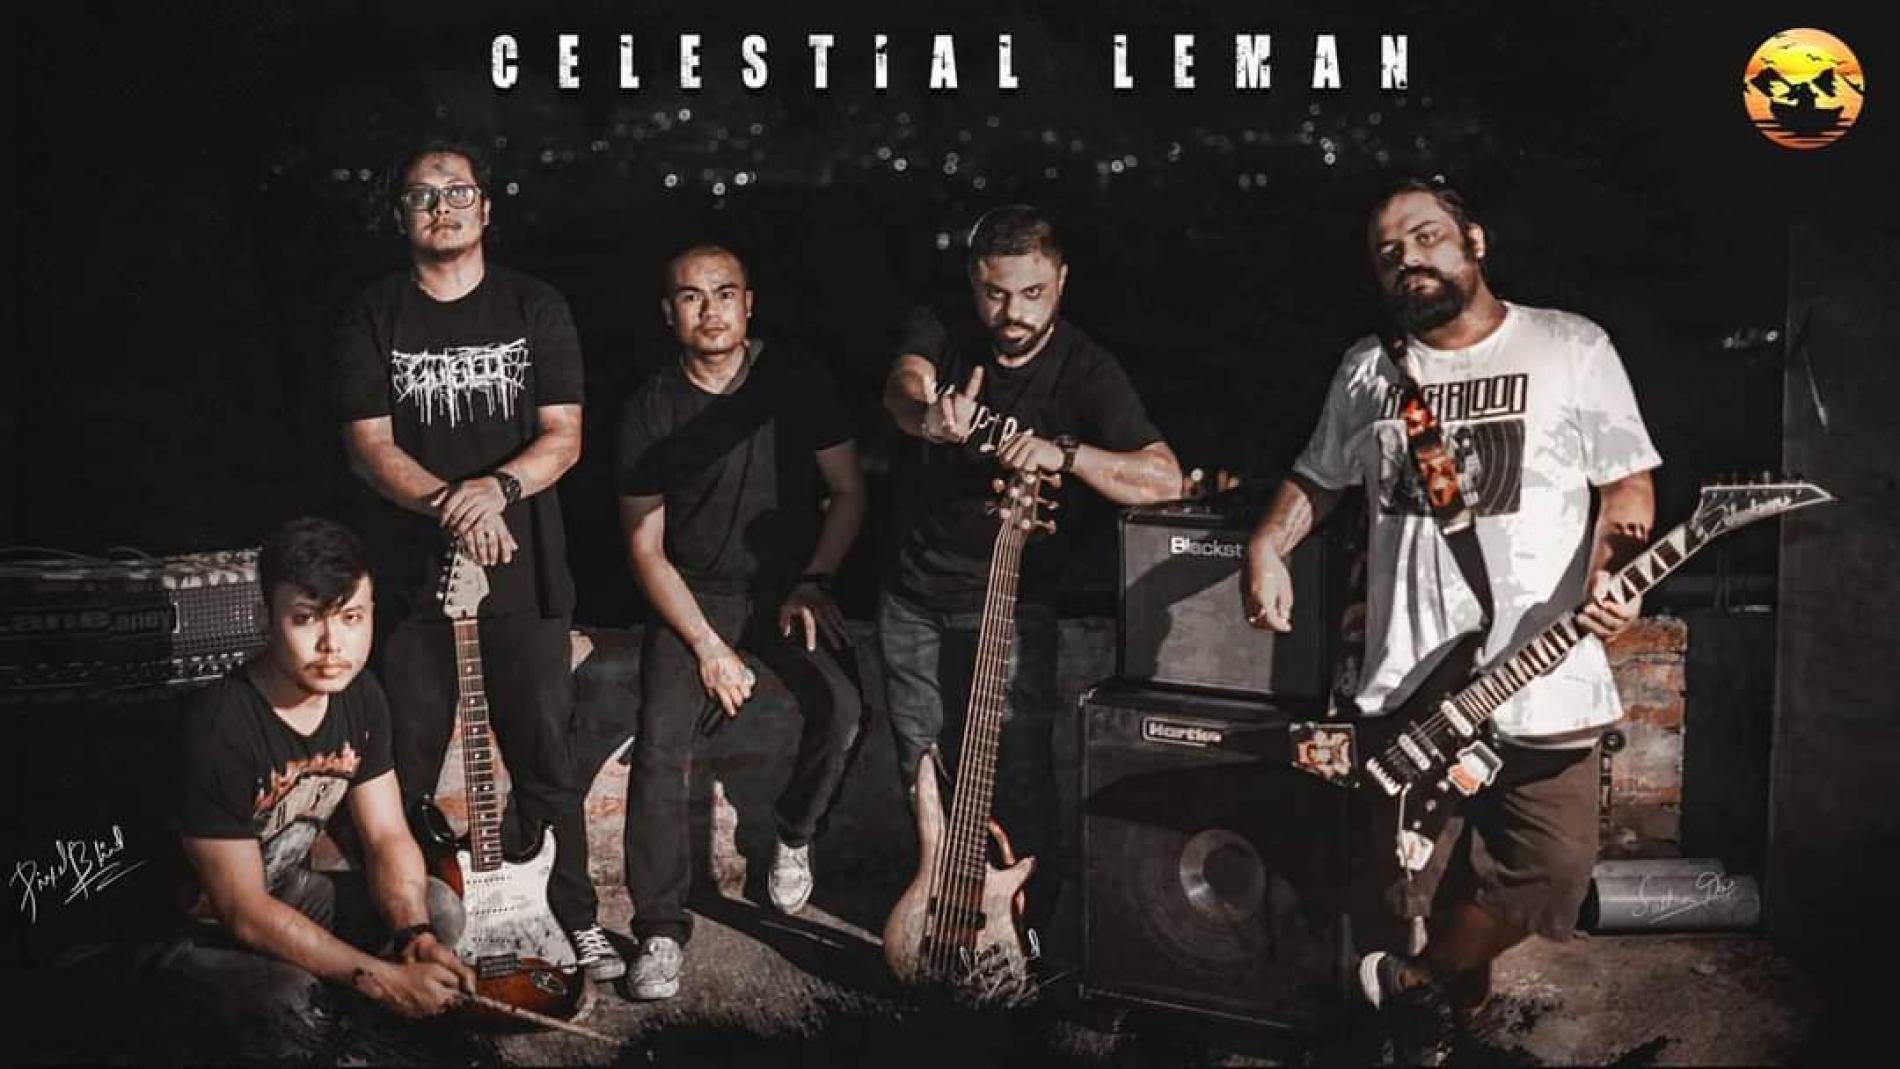 Exclusive : Grab Your Inner Child, Meet The Musicians From Assam Who Came Up With Celestial Leman